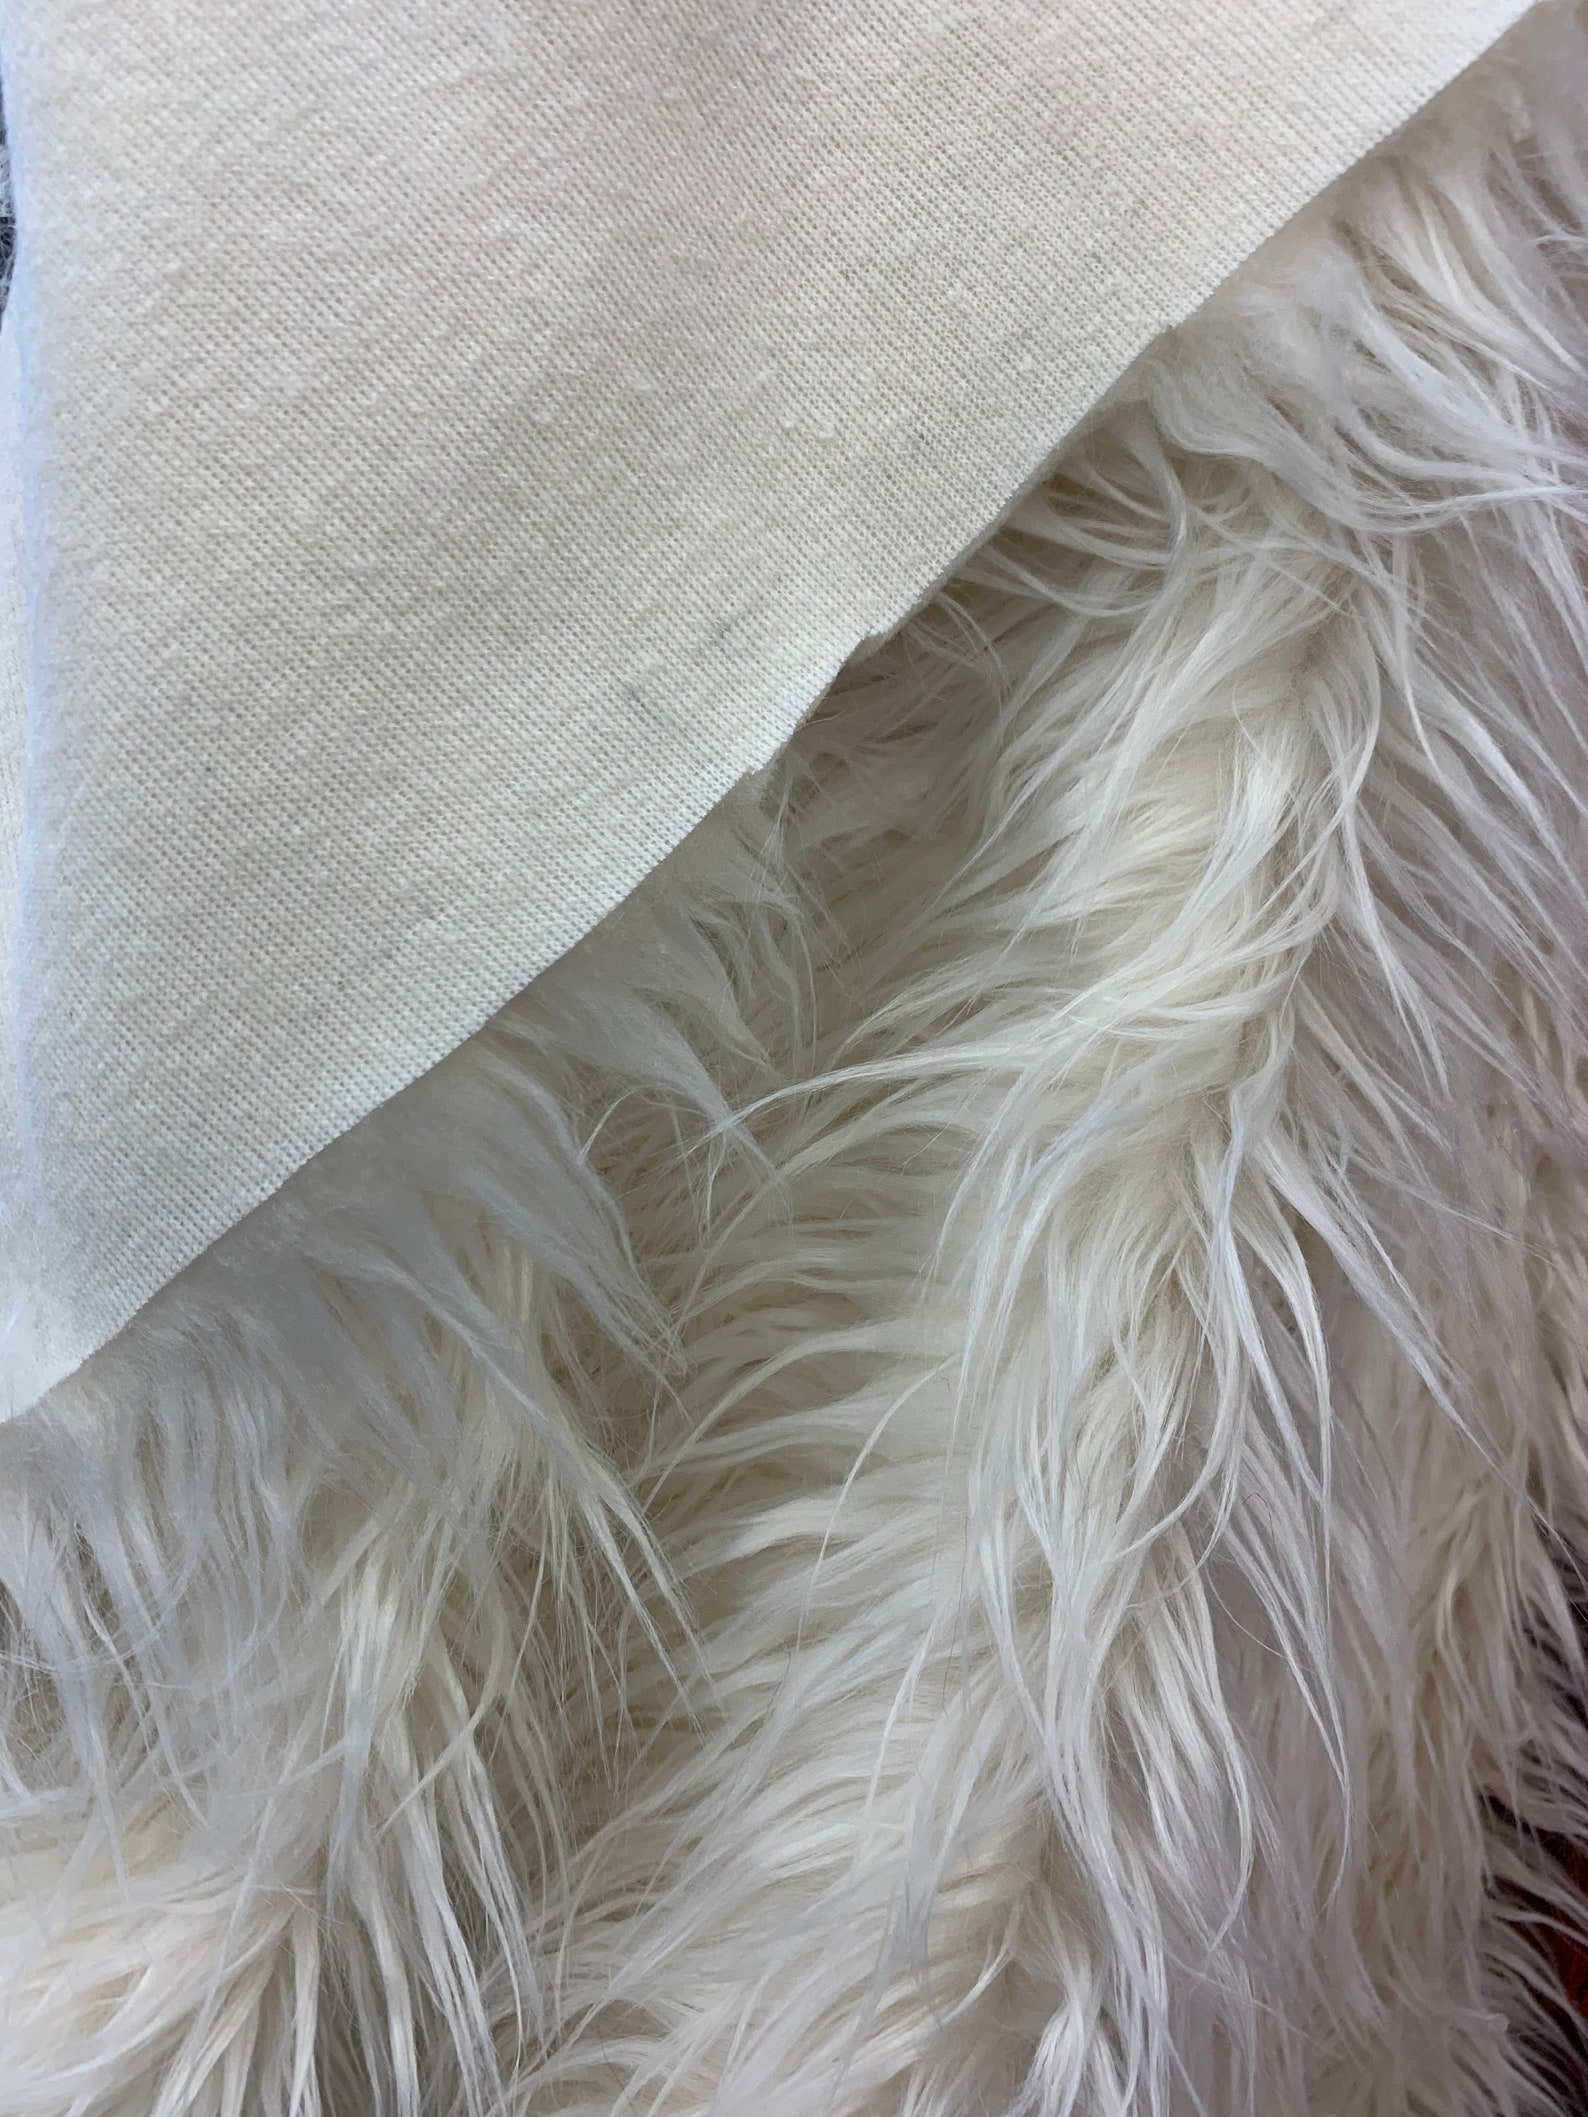 Ivory Canadian Faux Fur Fabric by the Yard Mongolian Long | Etsy